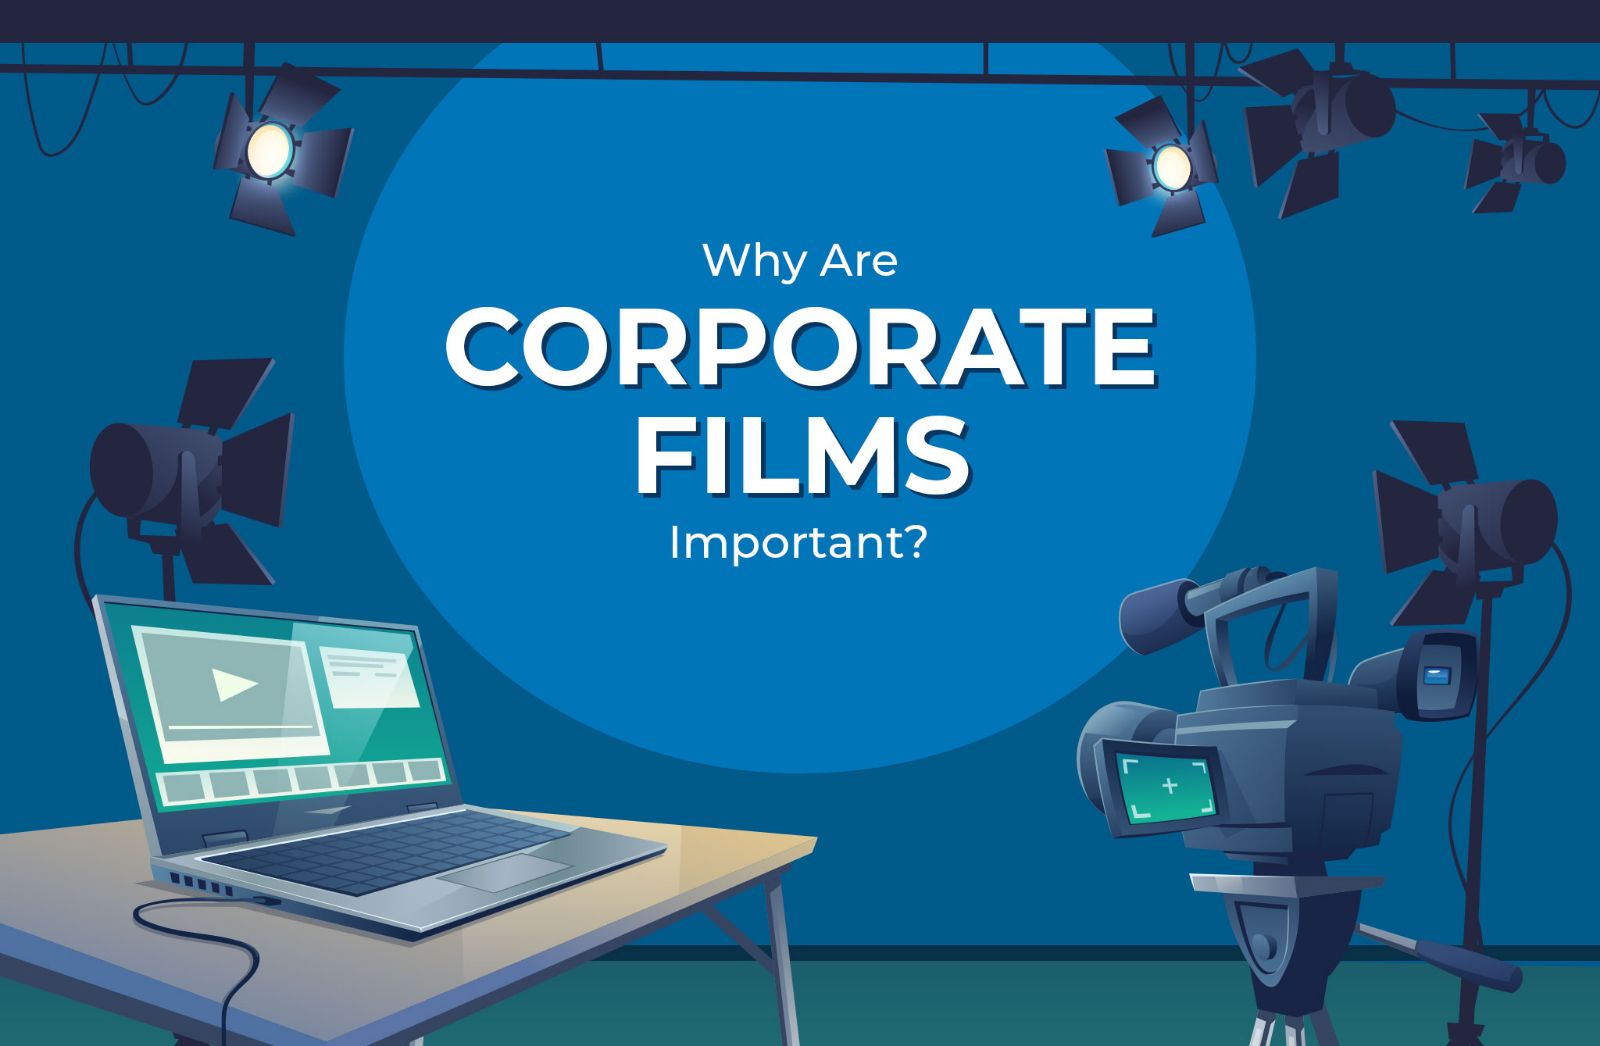 Why Are Corporate Films Important?